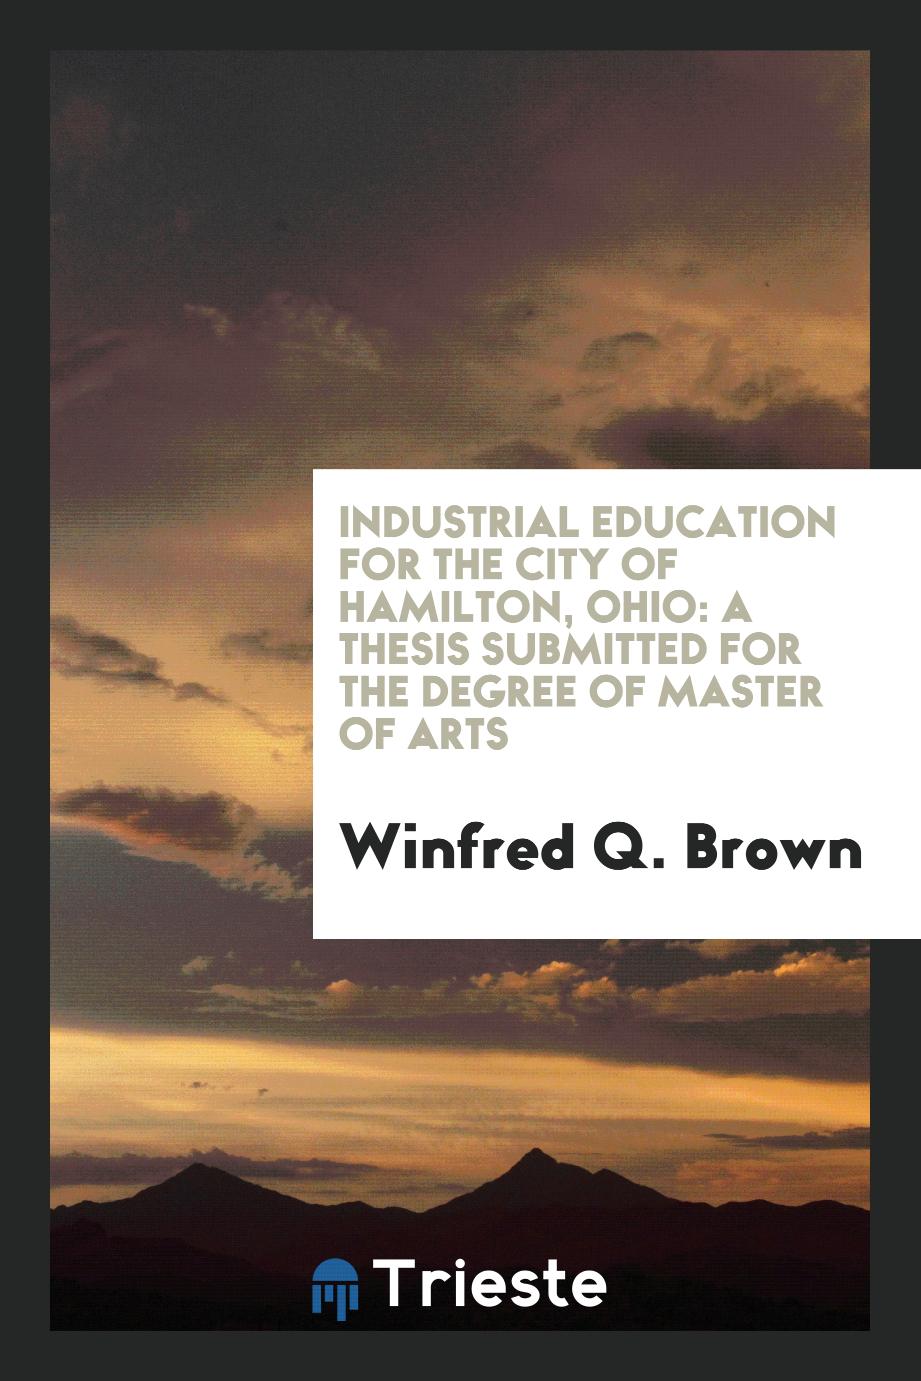 Industrial Education for the City of Hamilton, Ohio: A Thesis Submitted for the Degree of Master of Arts